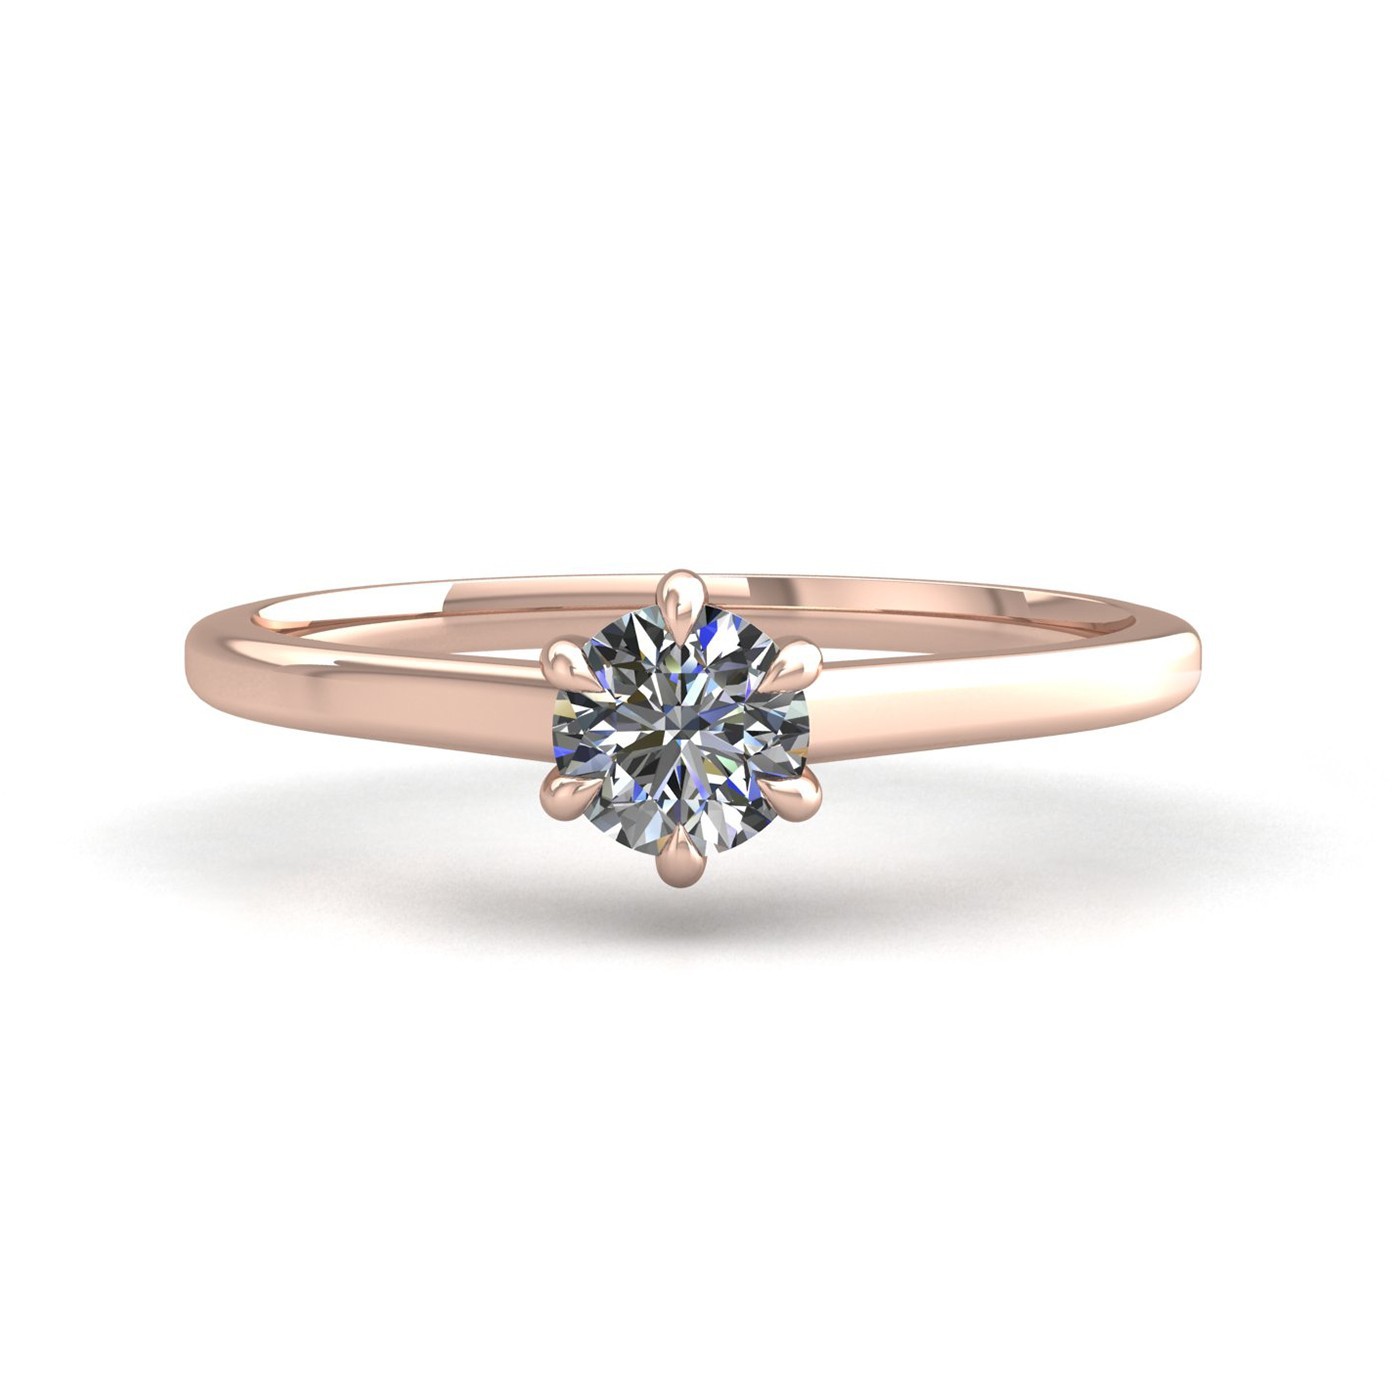 18k rose gold 0,80 ct 6 prongs solitaire round cut diamond engagement ring with whisper thin band Photos & images